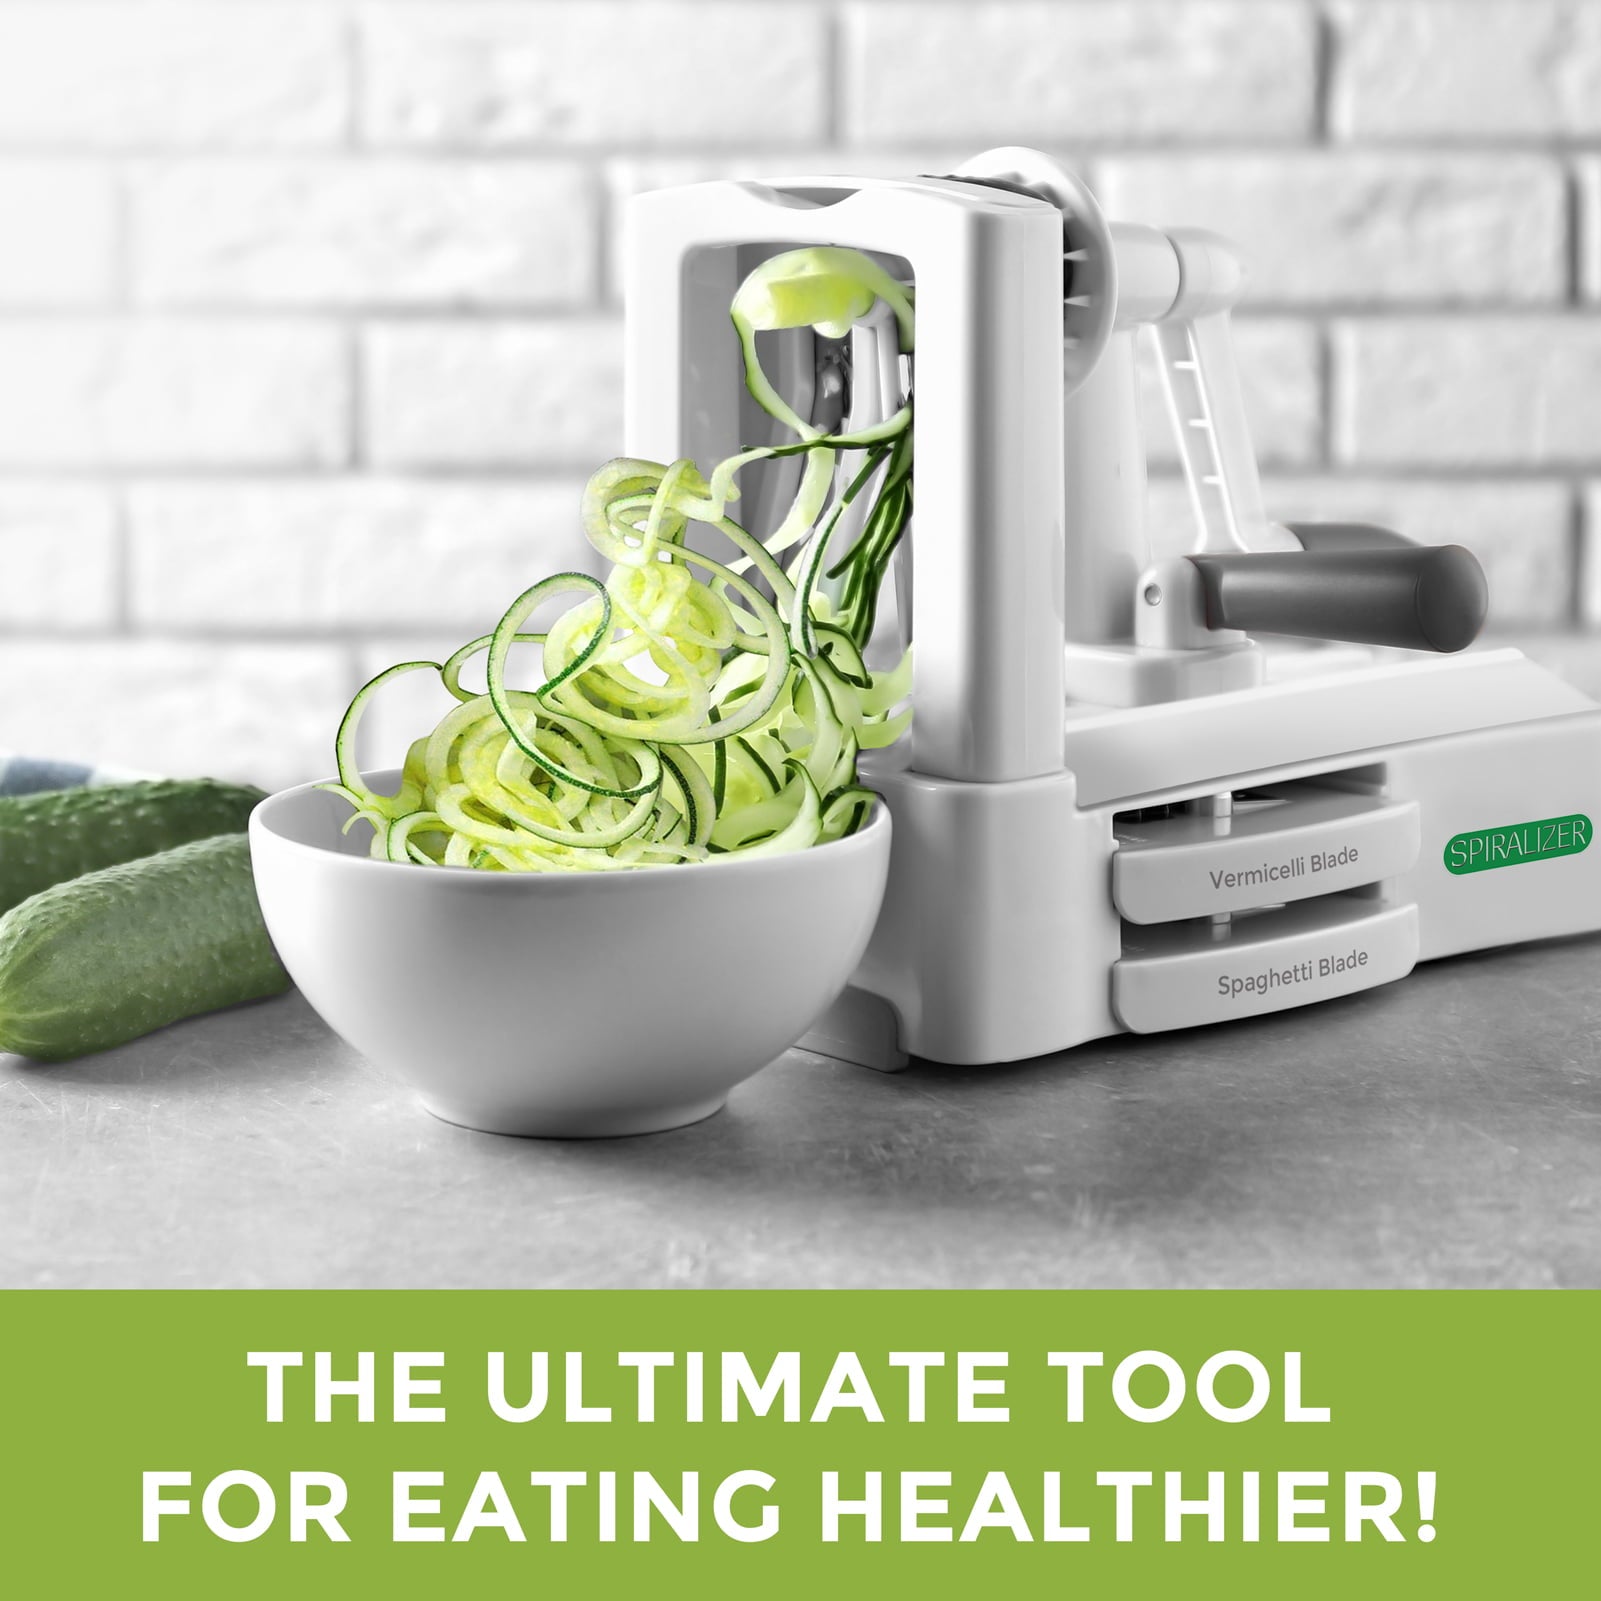 Spiralizer Ultimate 10 Strongest-and-Heaviest Duty Vegetable Slicer Best Veggie Pasta Spaghetti Maker for Keto/Paleo/Gluten-Free, With Extra Blade Caddy & 4 Recipe Ebook Color White